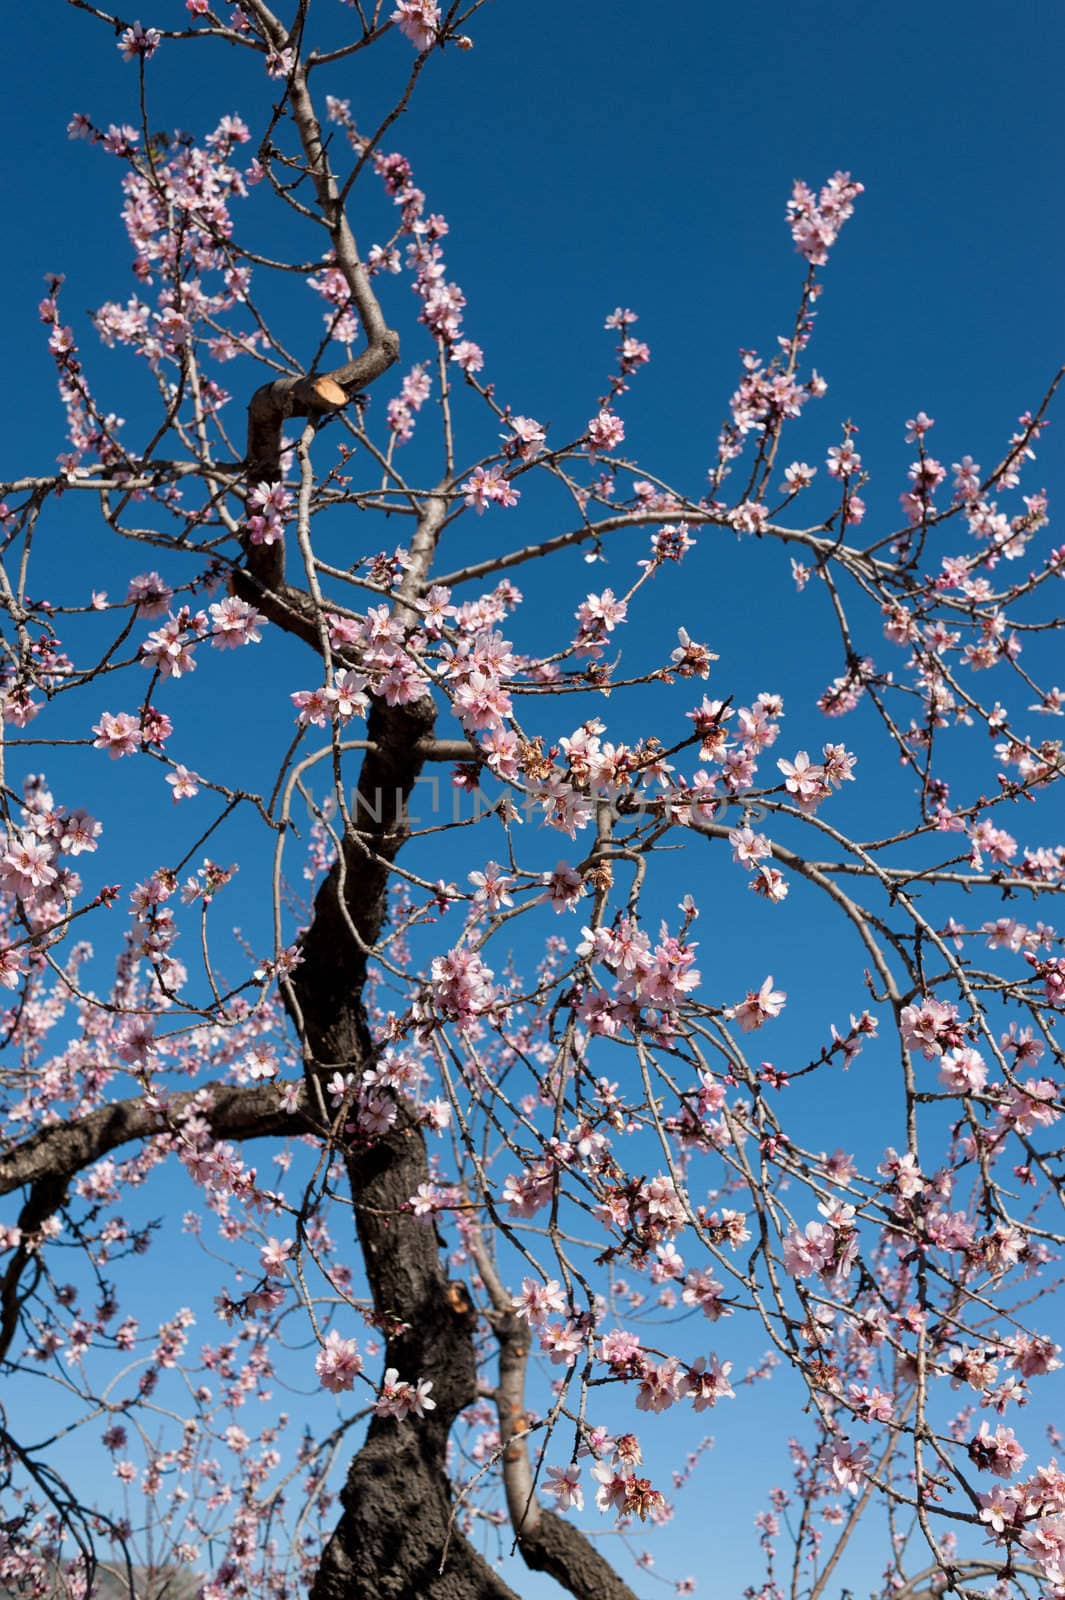 Dry branch of an old almond tree flowering